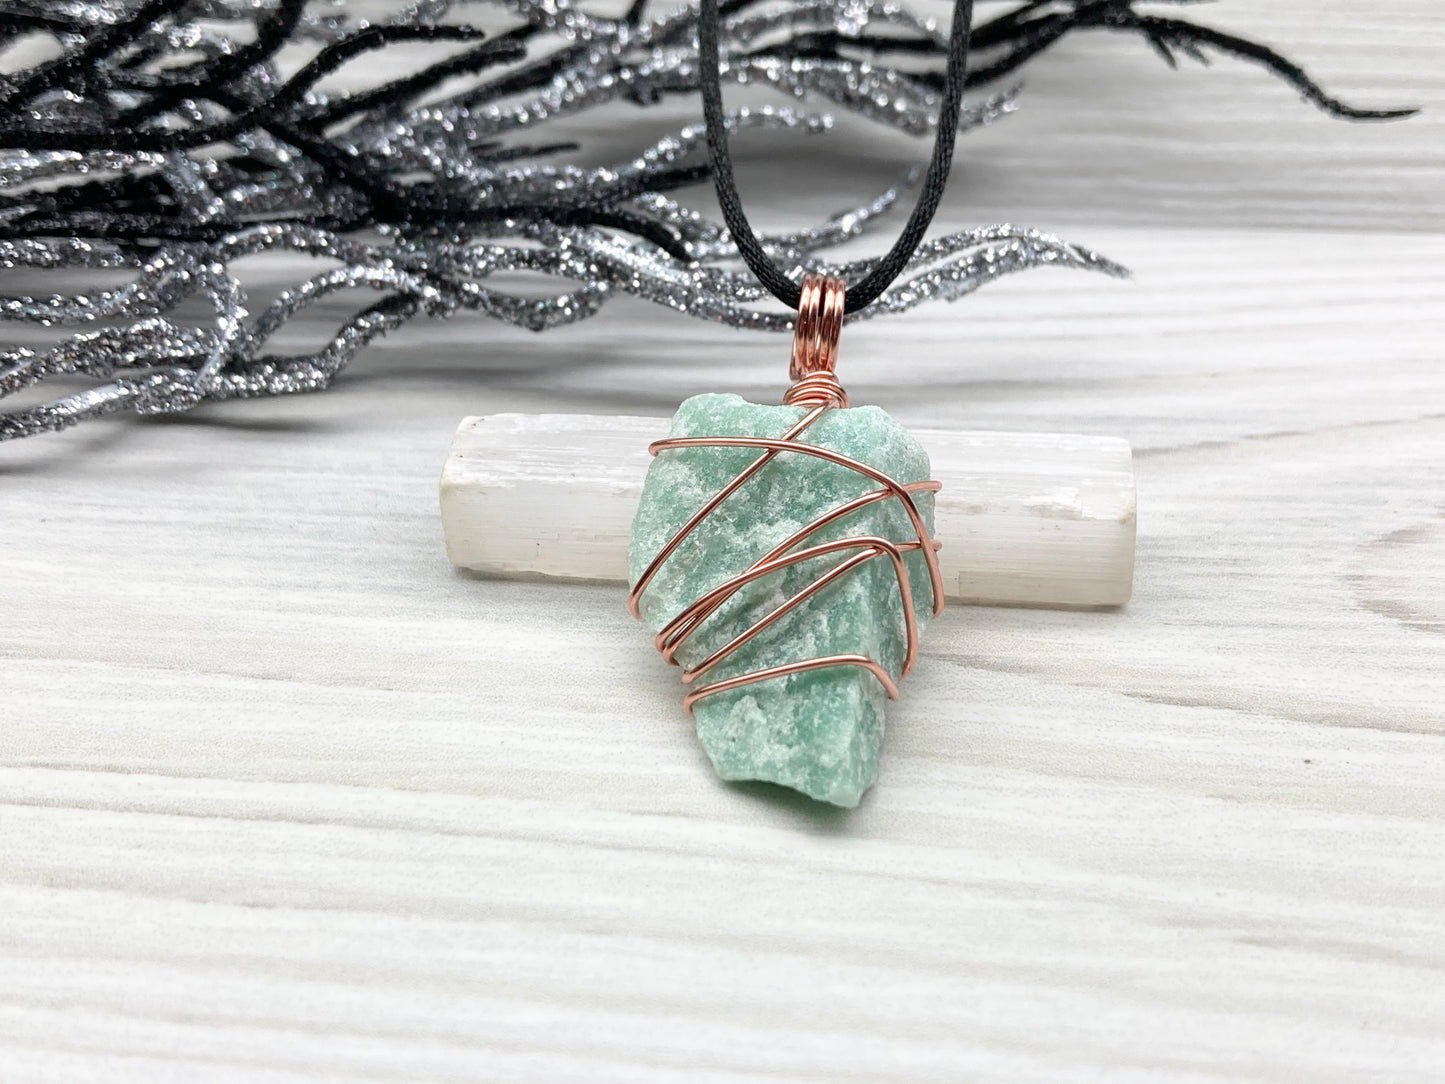 Green Quartz Necklace. Raw Green Crystal Wrapped With Pure Copper Wire. Comes On A Black Chain. Pagan Wiccan Style Handmade Jewelry.